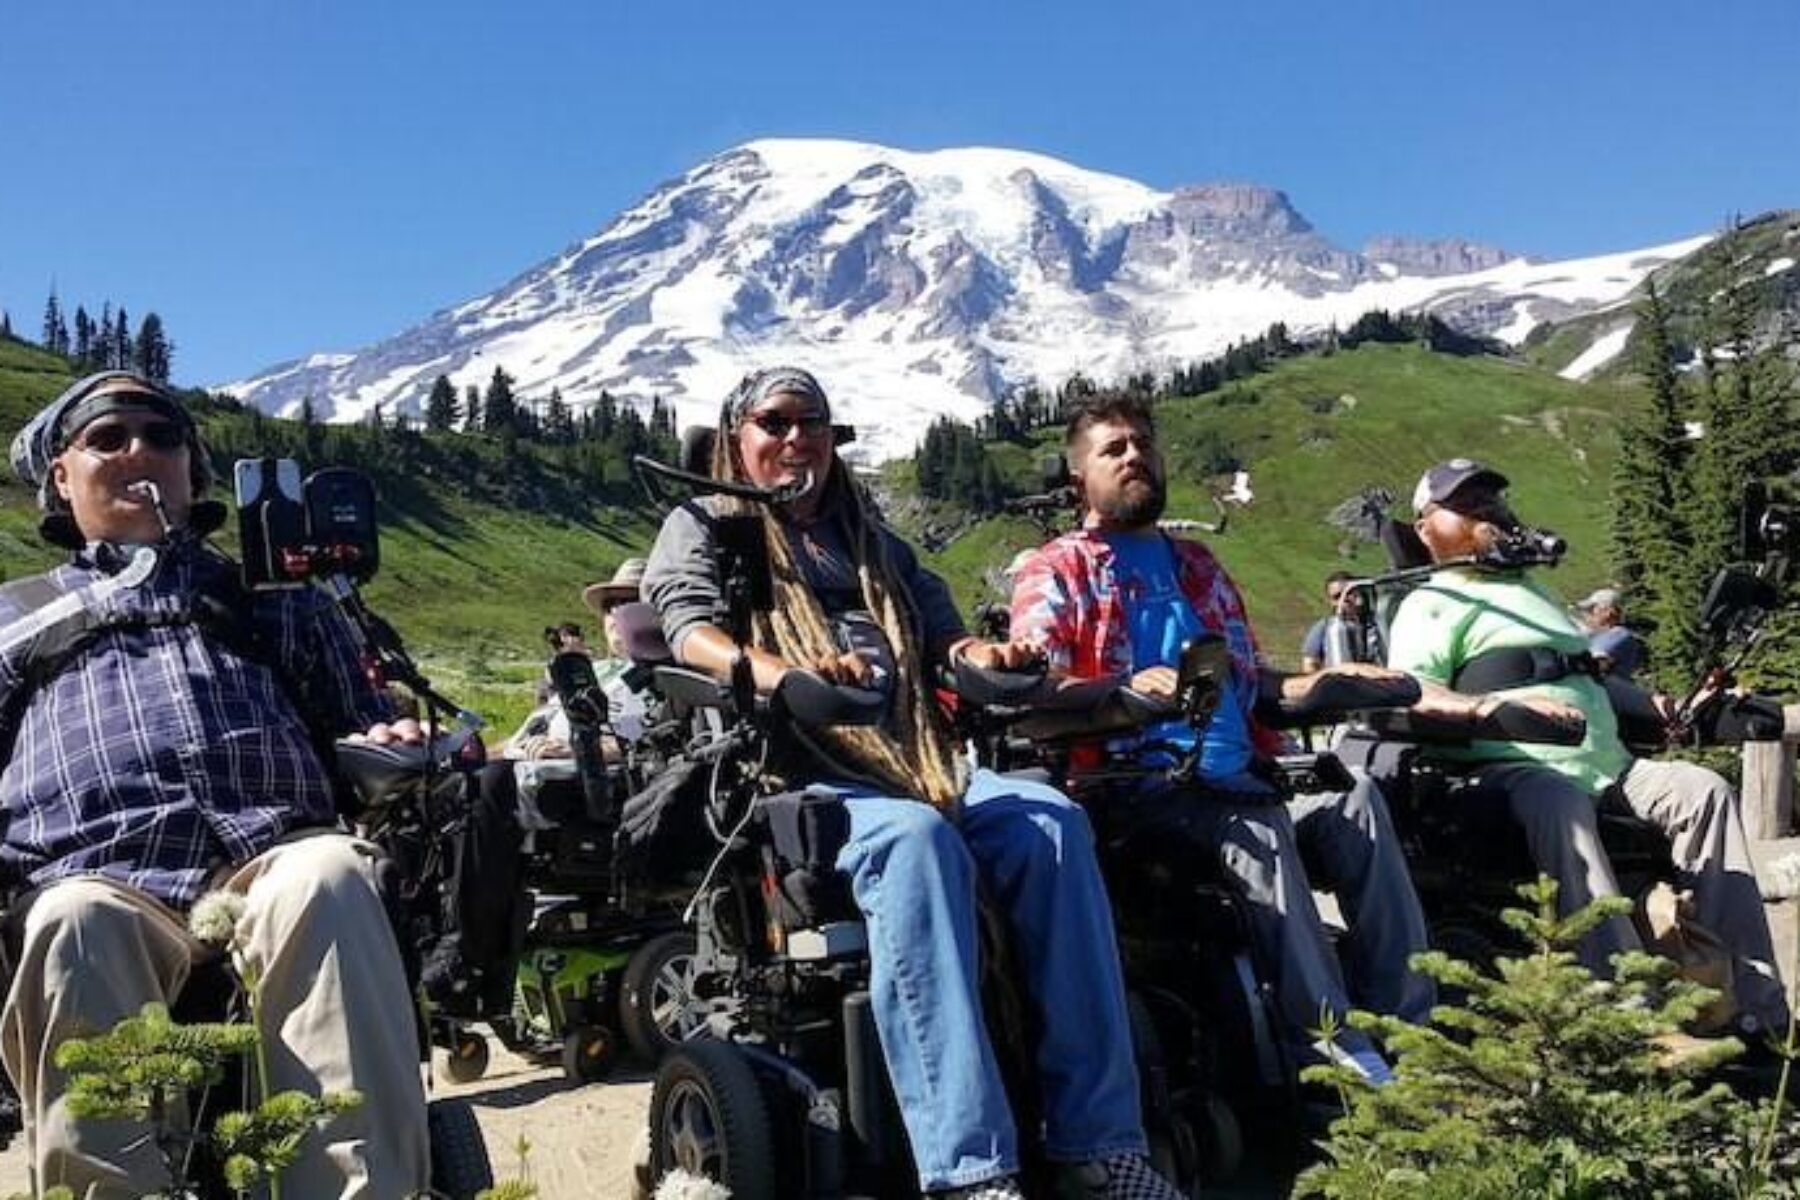 Ian Mackay, founder of Ian's Ride (second from left), at the foot of Mount Rainier with friends Jesse Collens, Kenny Salvini and Todd Stabelfeldt | Photo by Teena Woodward